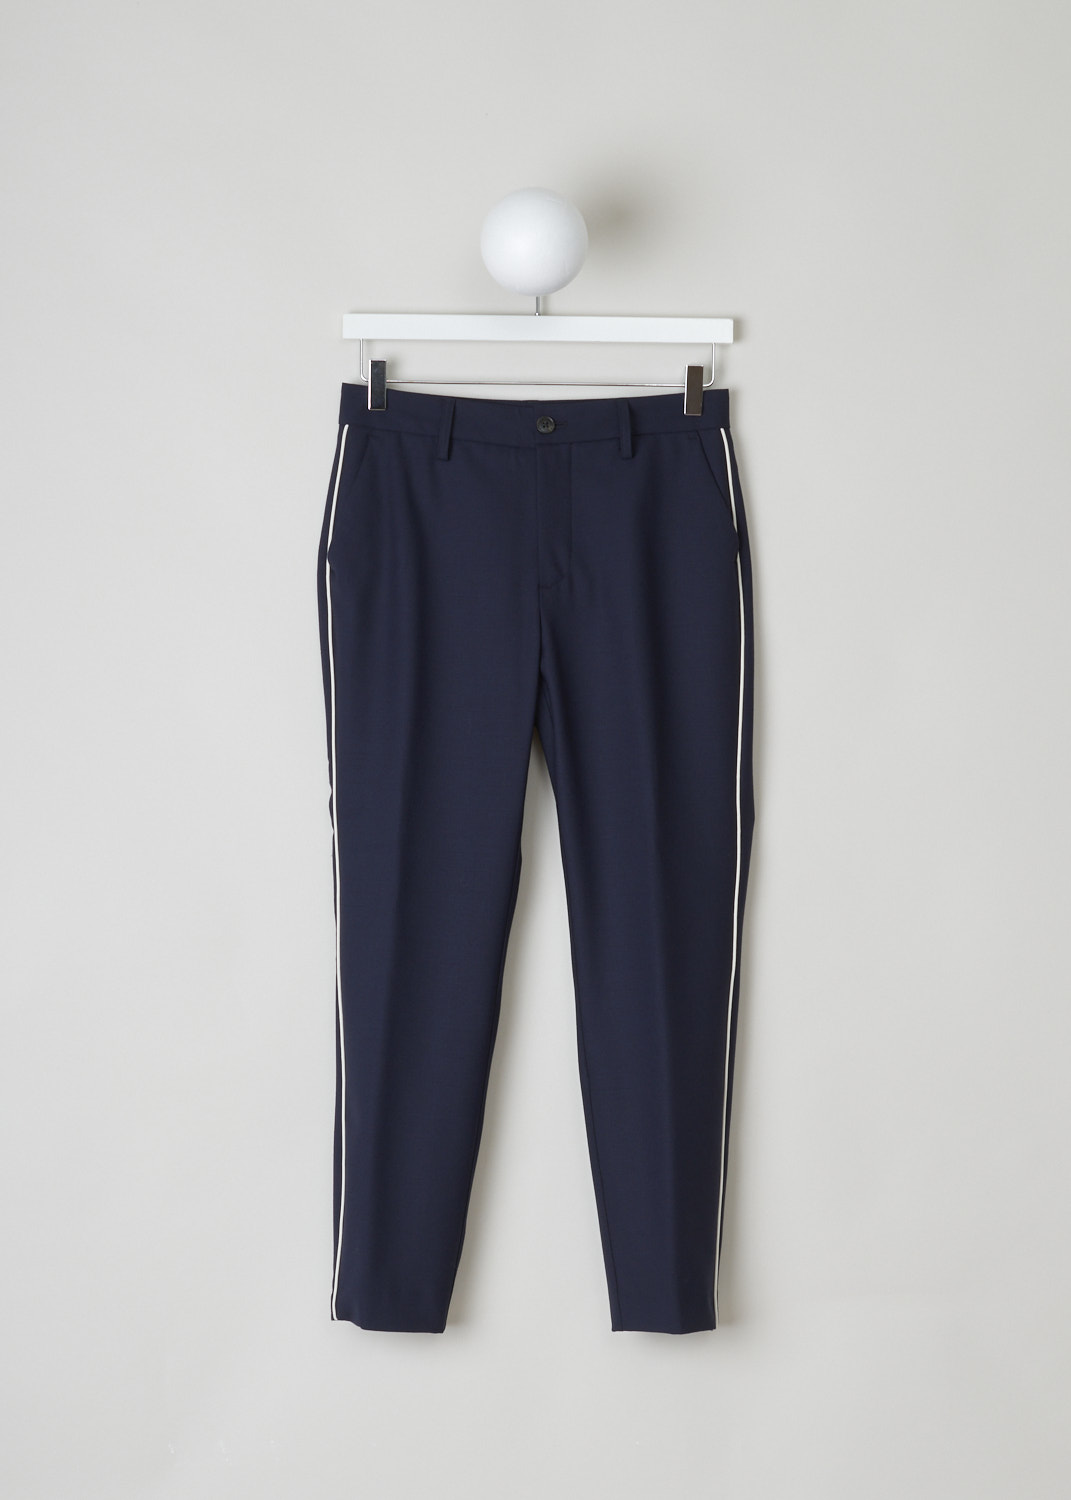 Closed, navy pants with white stripe, jack_C91012_5H3_4P_568, blue, front, Navy coloured pants with white stripe going down the side seam. featuring two forward slanted pockets on the front and two jetted pockets on the back. the fastening option here is the zipper and button on the front. 